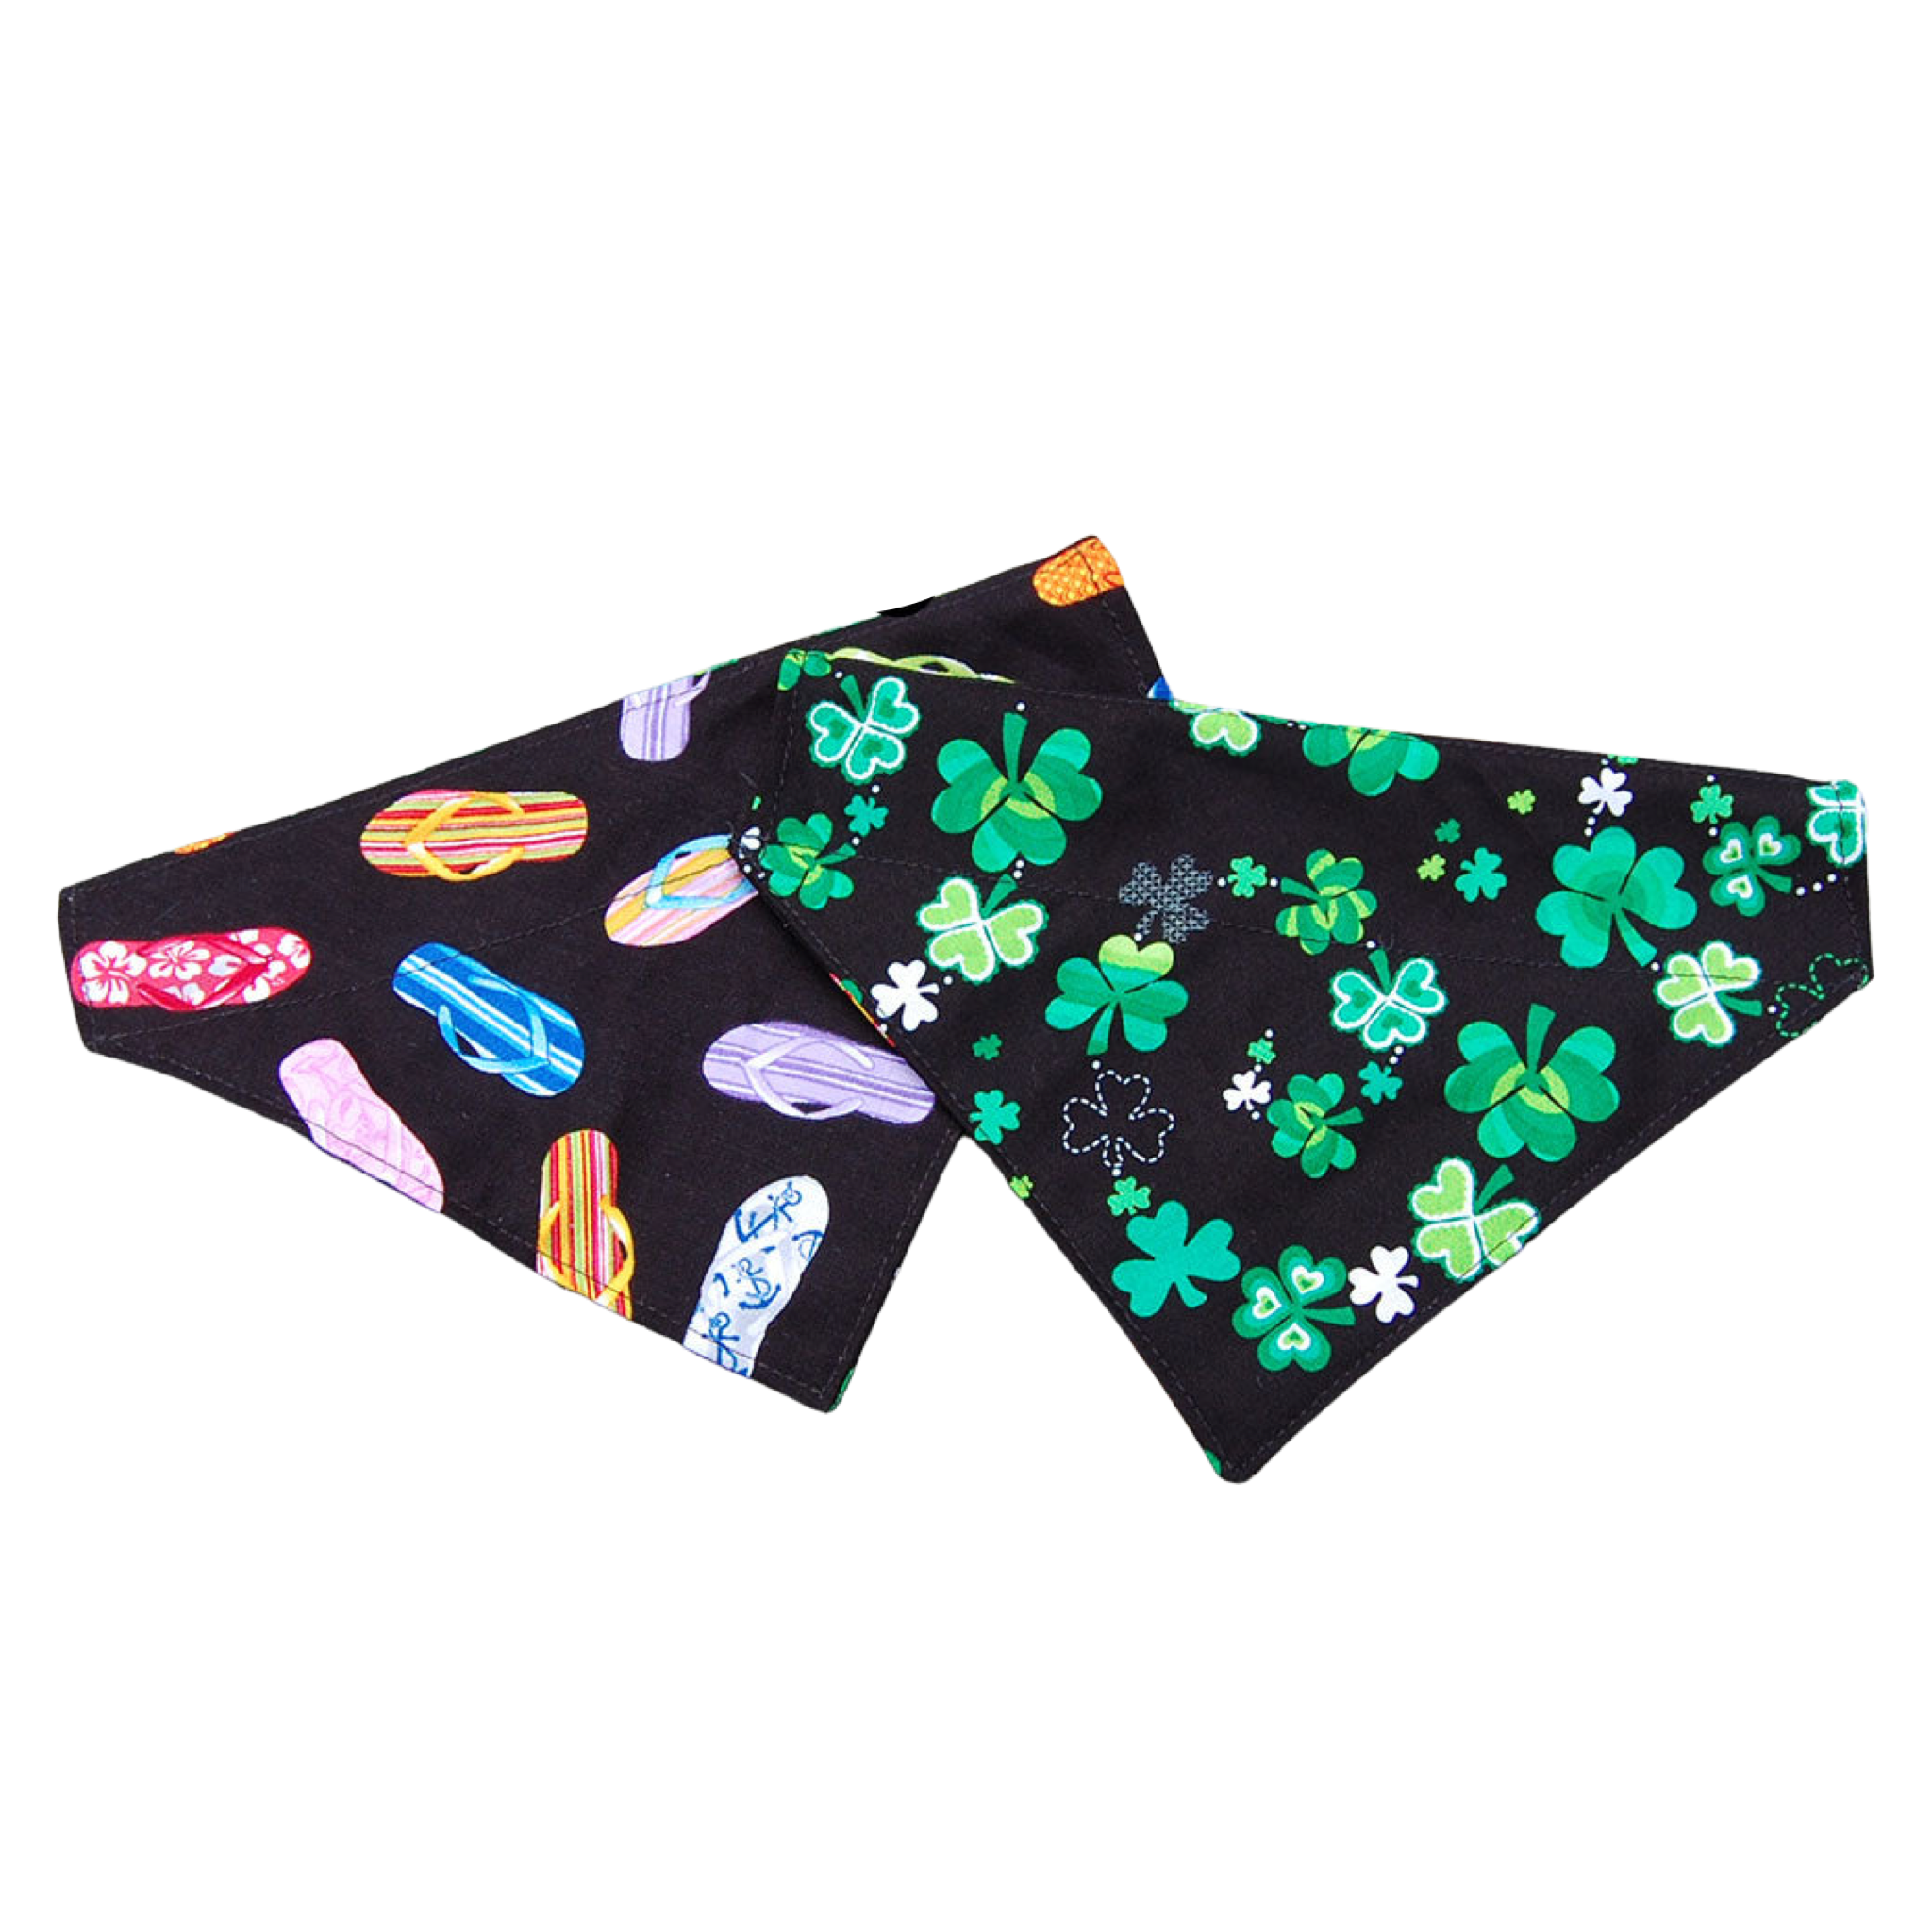 Double Sided Dog Bandana with Flip Flops on one side and shamrocks on the other.  Reversible dog scarf slips on collar.